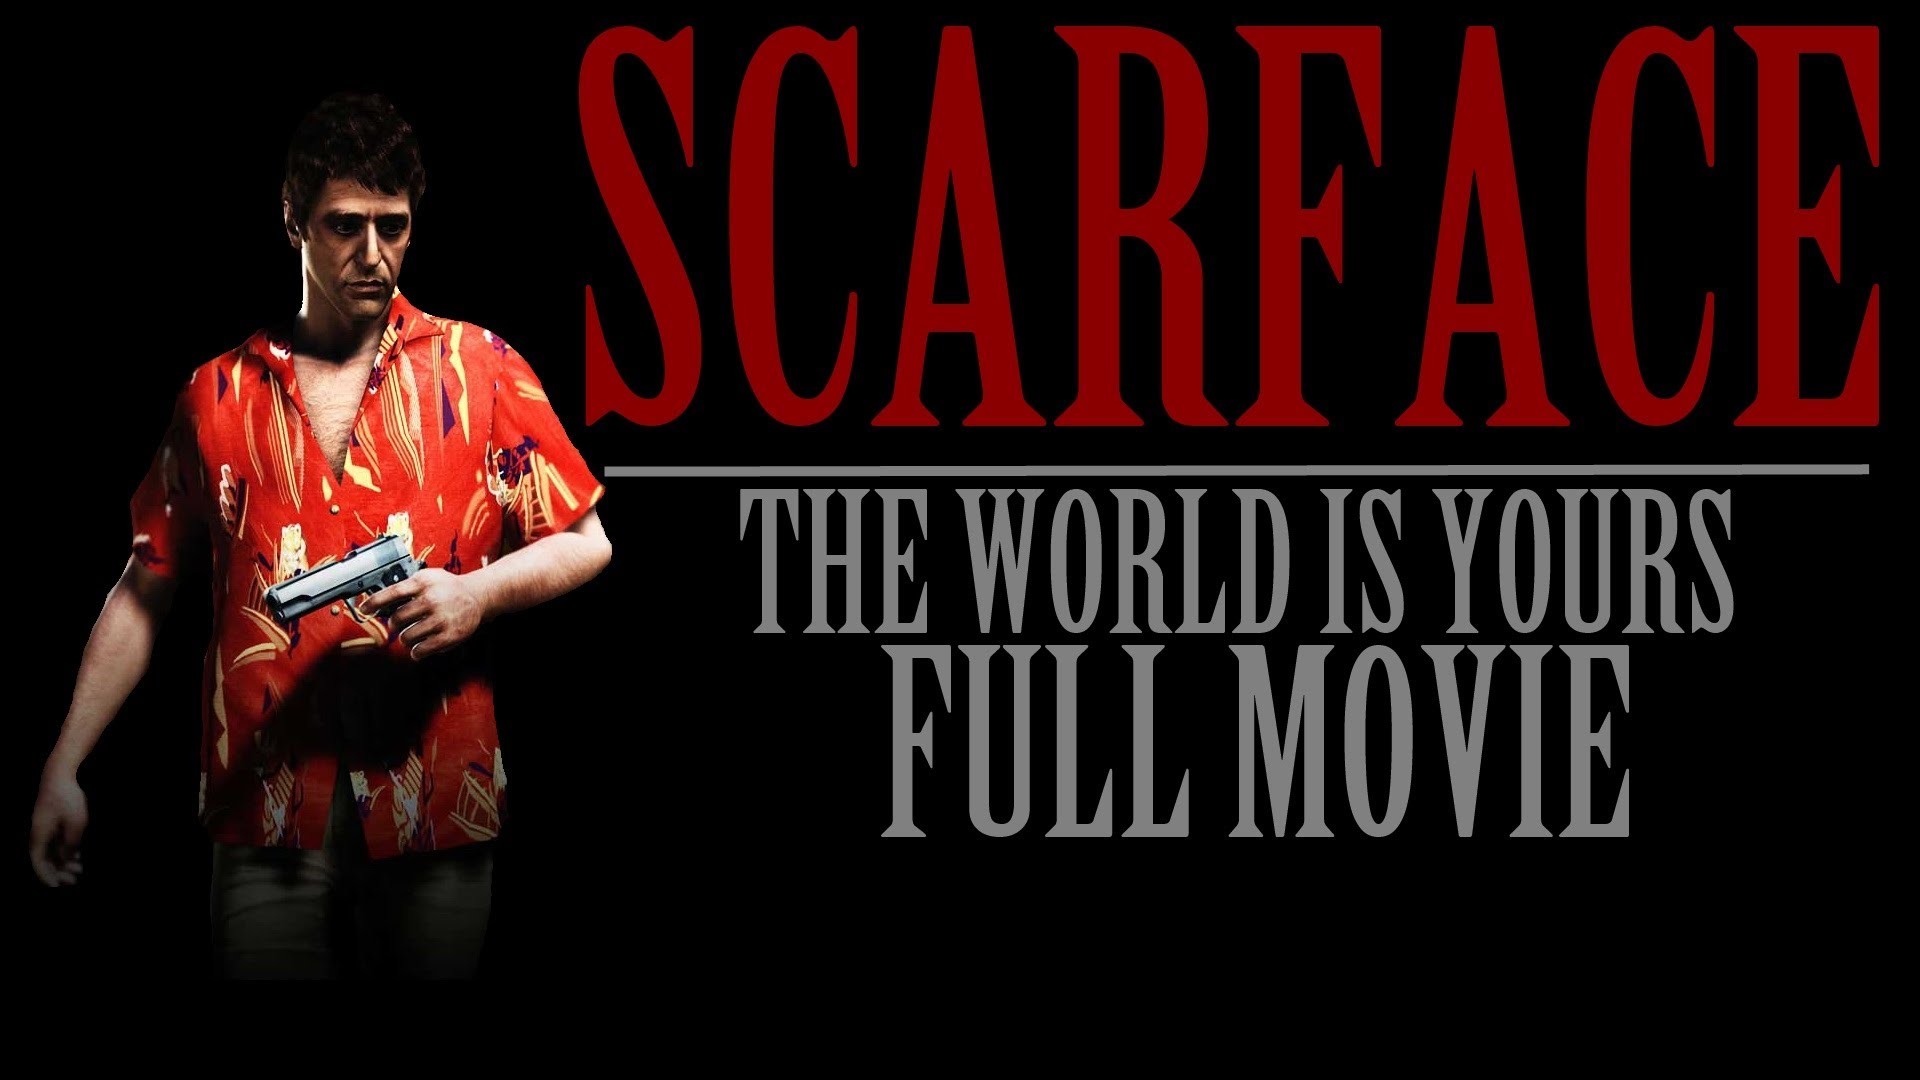 1920x1080 Scarface The World Is Yours: Full Movie (All Game Cutscenes) HD - YouTube